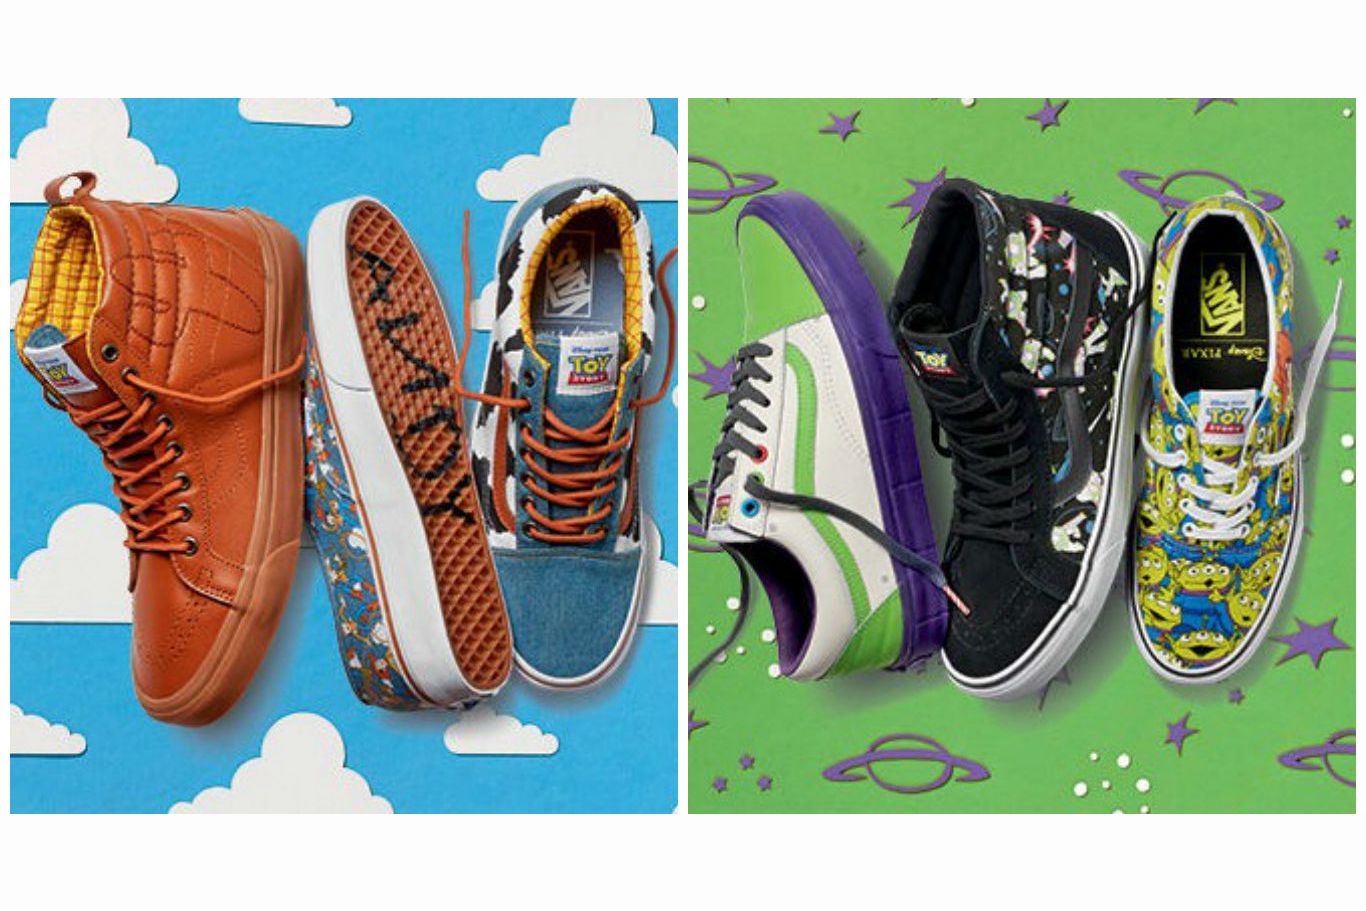 Which Toy Story Vans Are You Most Excited For?